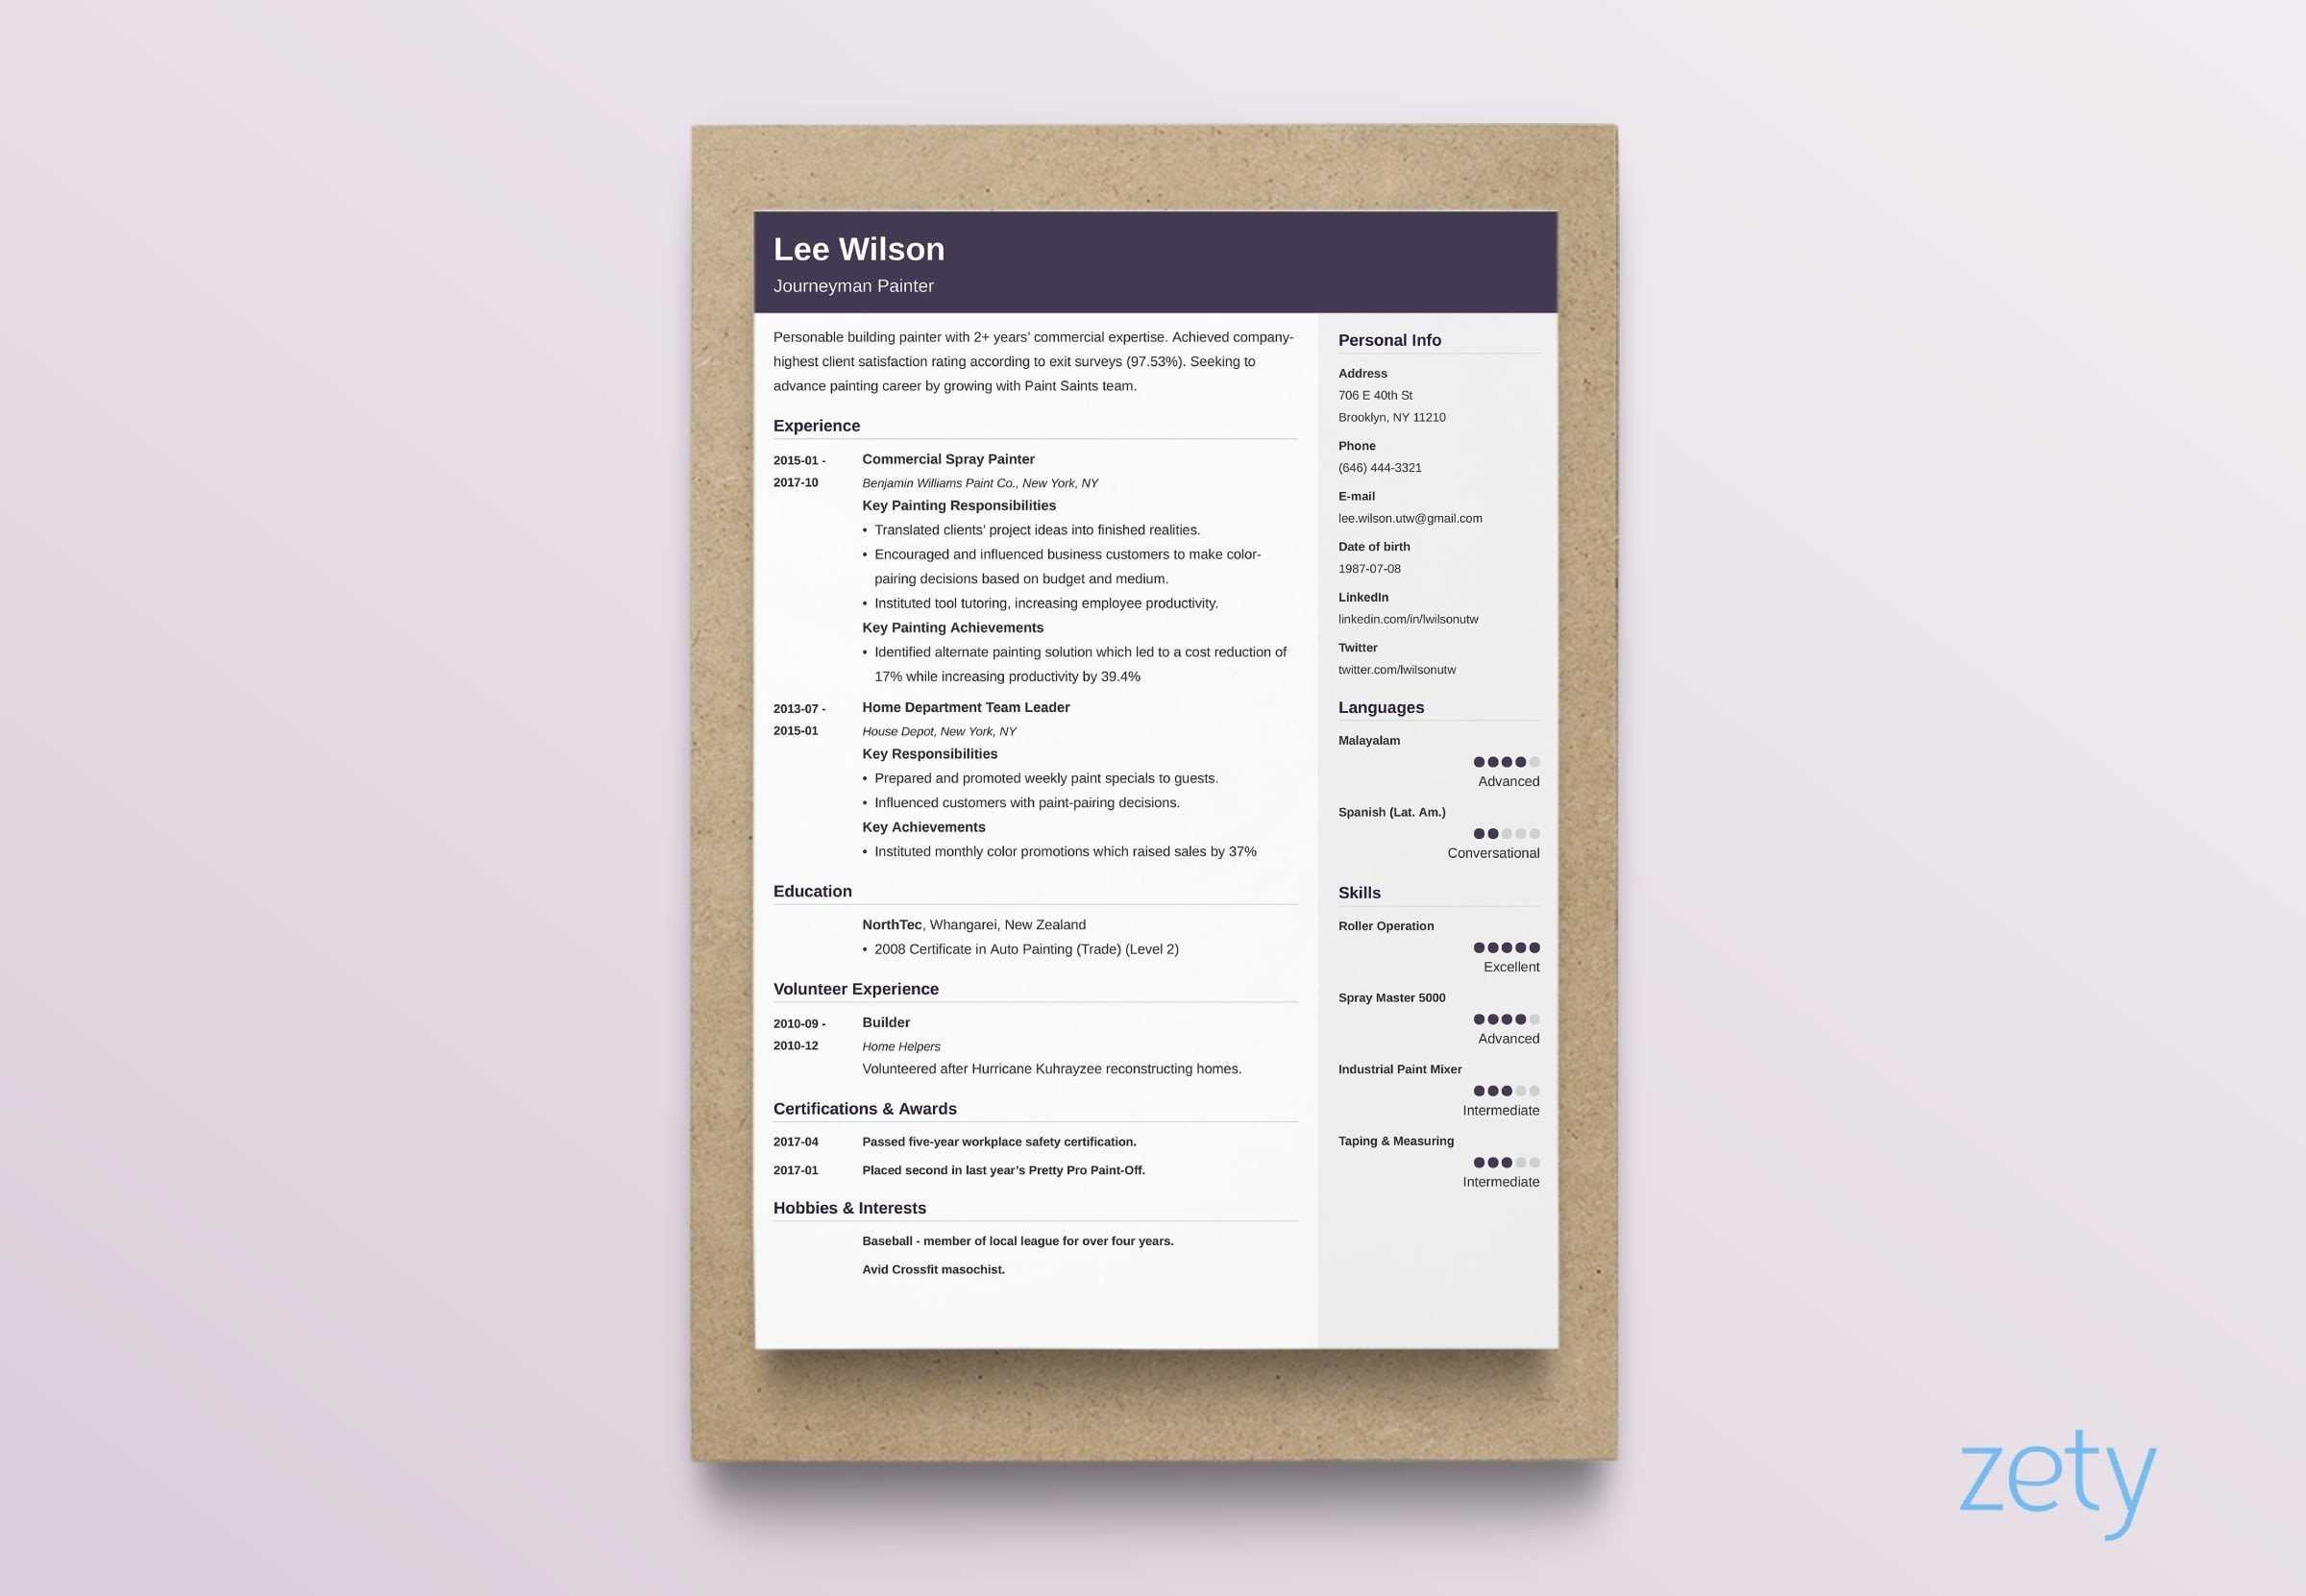 Curriculum Vitae (Cv) Format [20+ Examples & Tips] Intended For Blank Table Of Contents Template Pdf